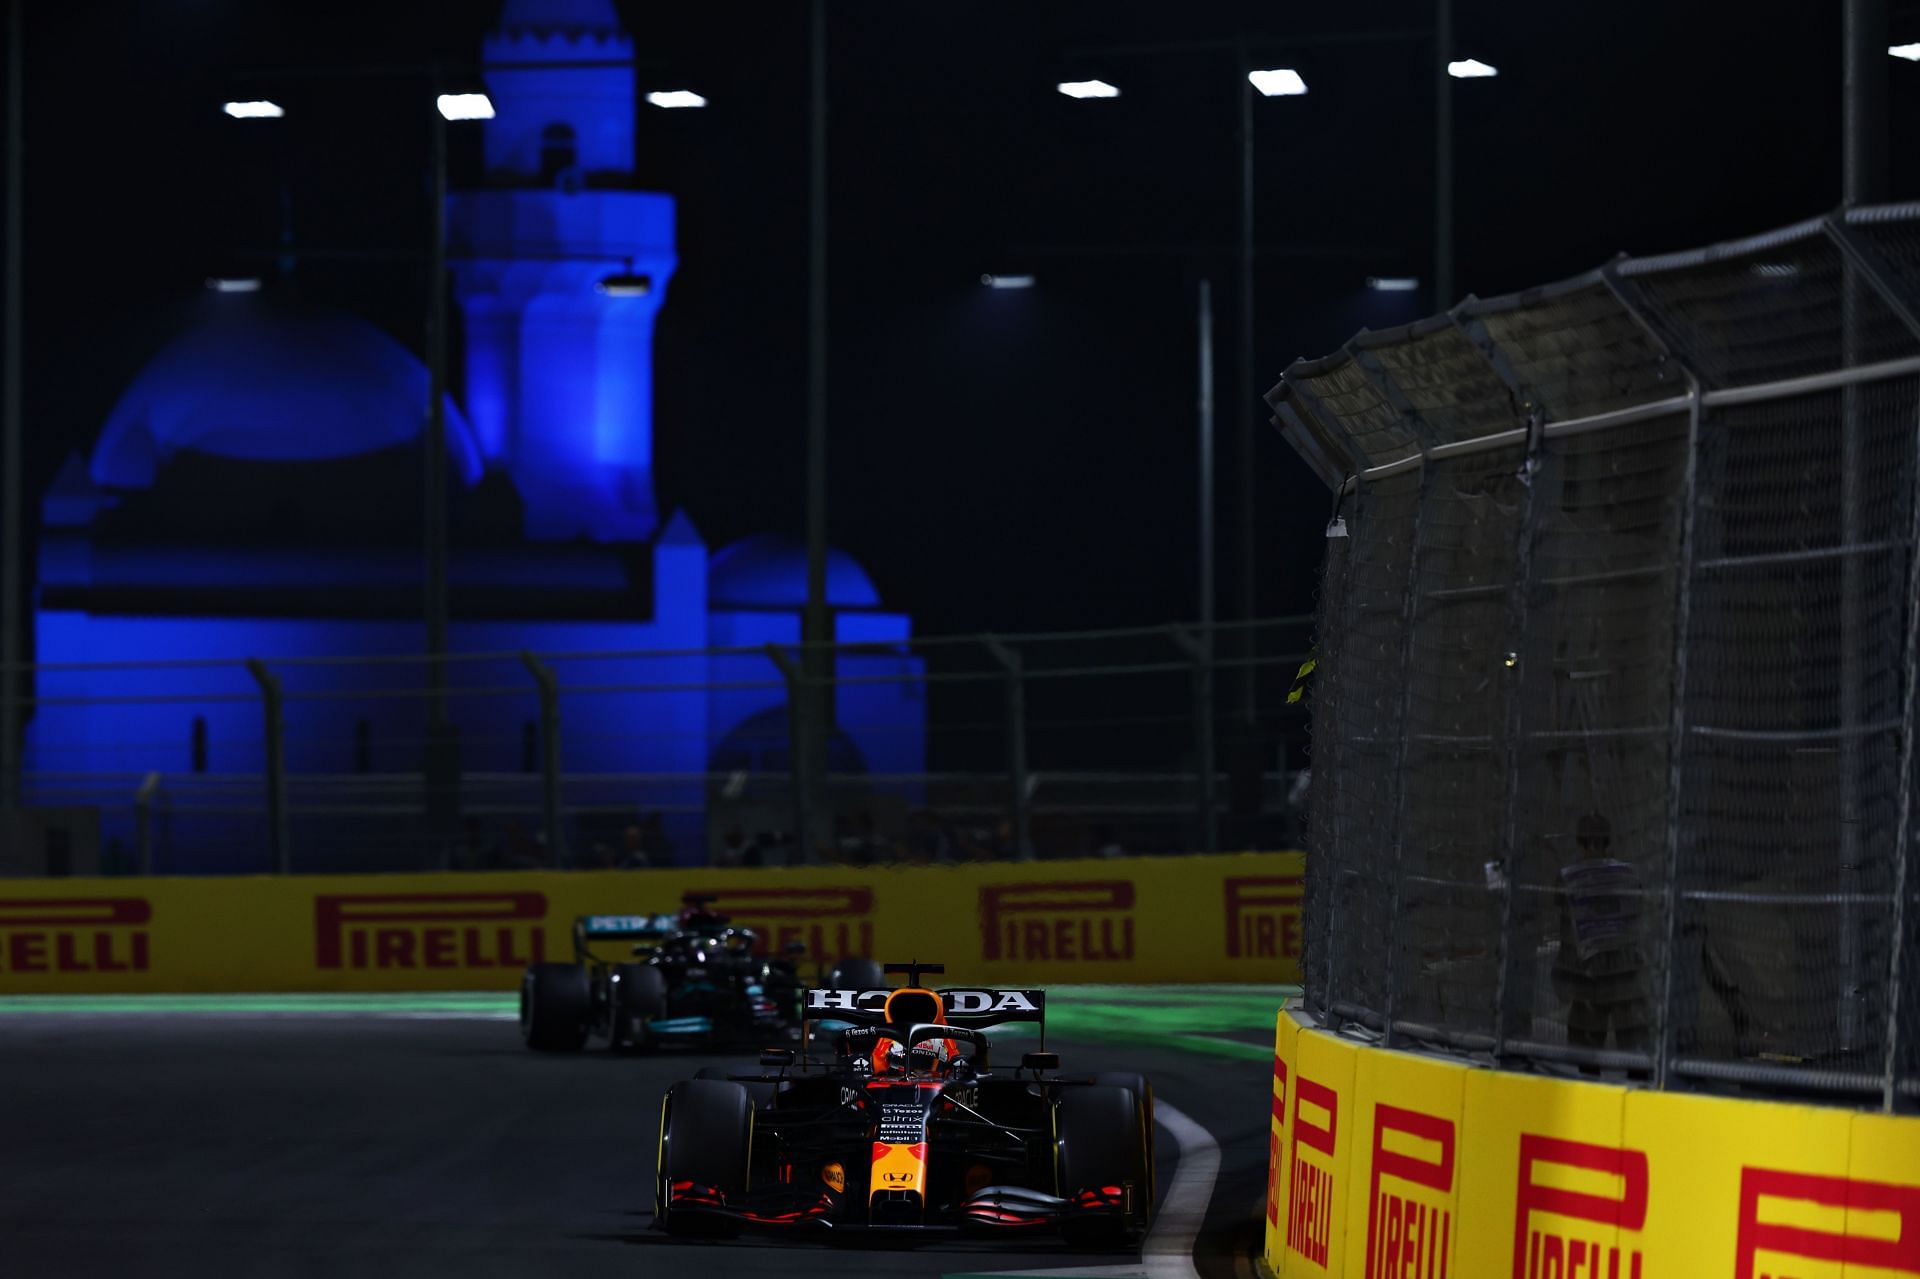 F1 Grand Prix of Saudi Arabia - Max Verstappen leads Lewis Hamilton before giving up the track position.